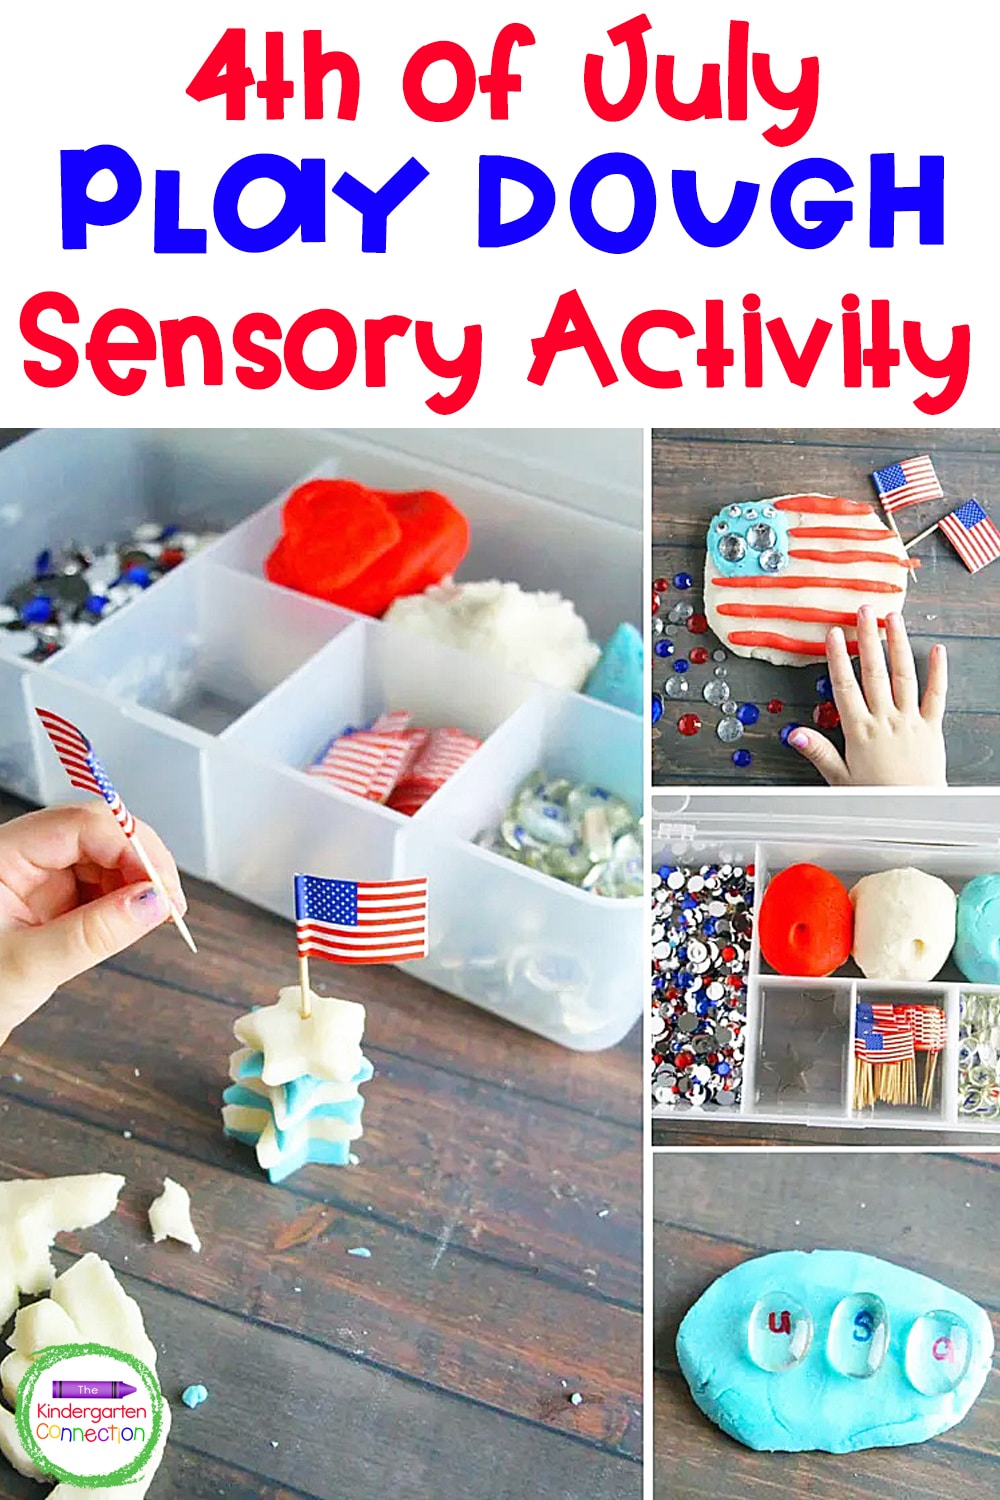 This patriotic play dough kit for kids is perfect for the 4th of July! Stay cool indoors and have some hands-on sensory fun!